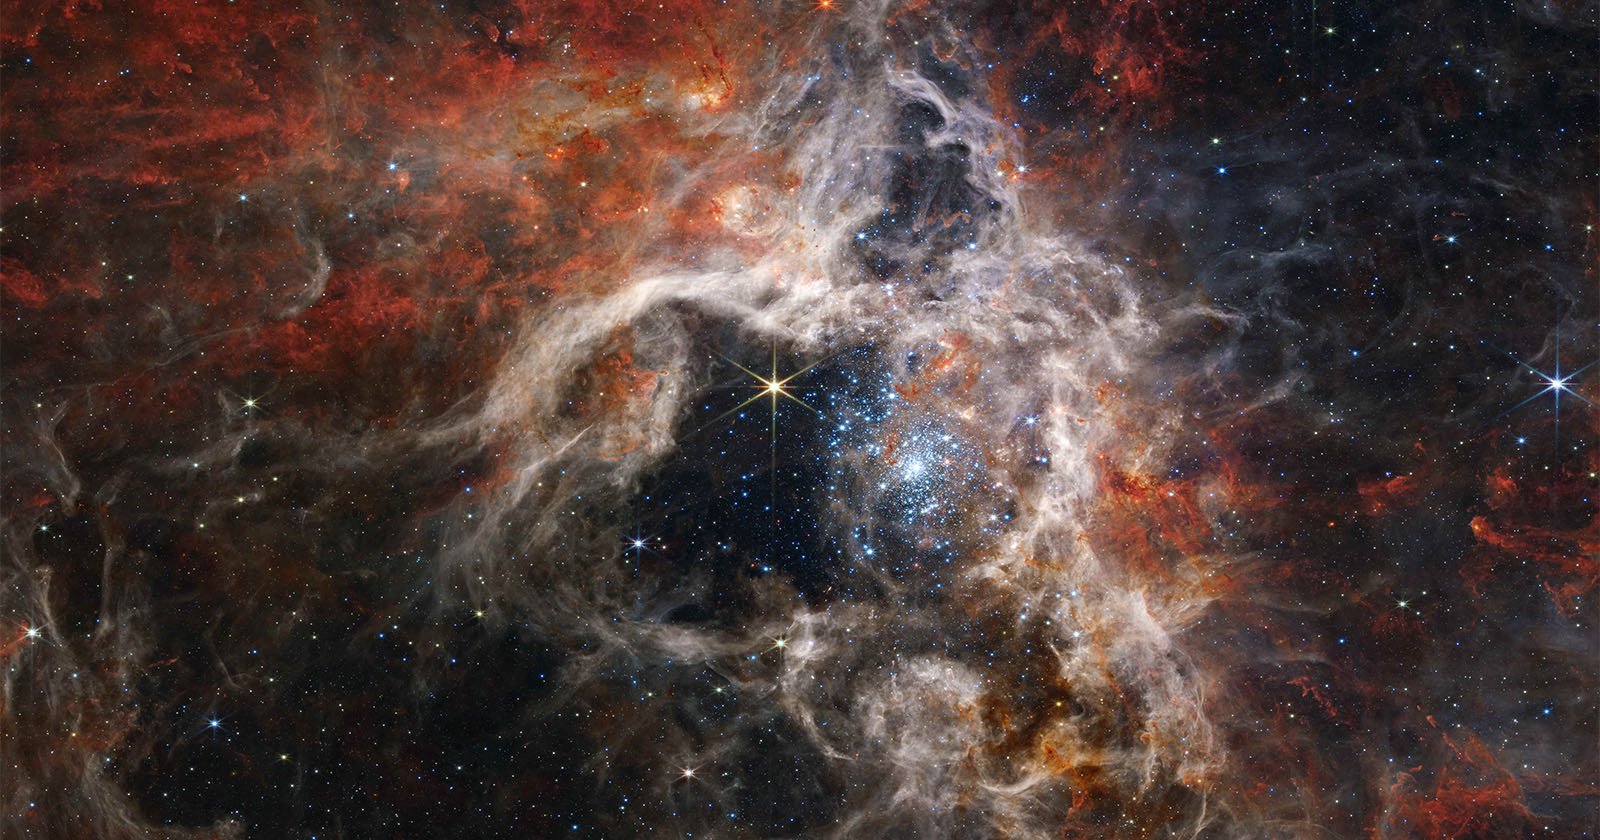 A vibrant cosmic scene featuring a cluster of bright stars surrounded by intricate networks of reddish-orange gas and dust nebulae, set against a dark space background.